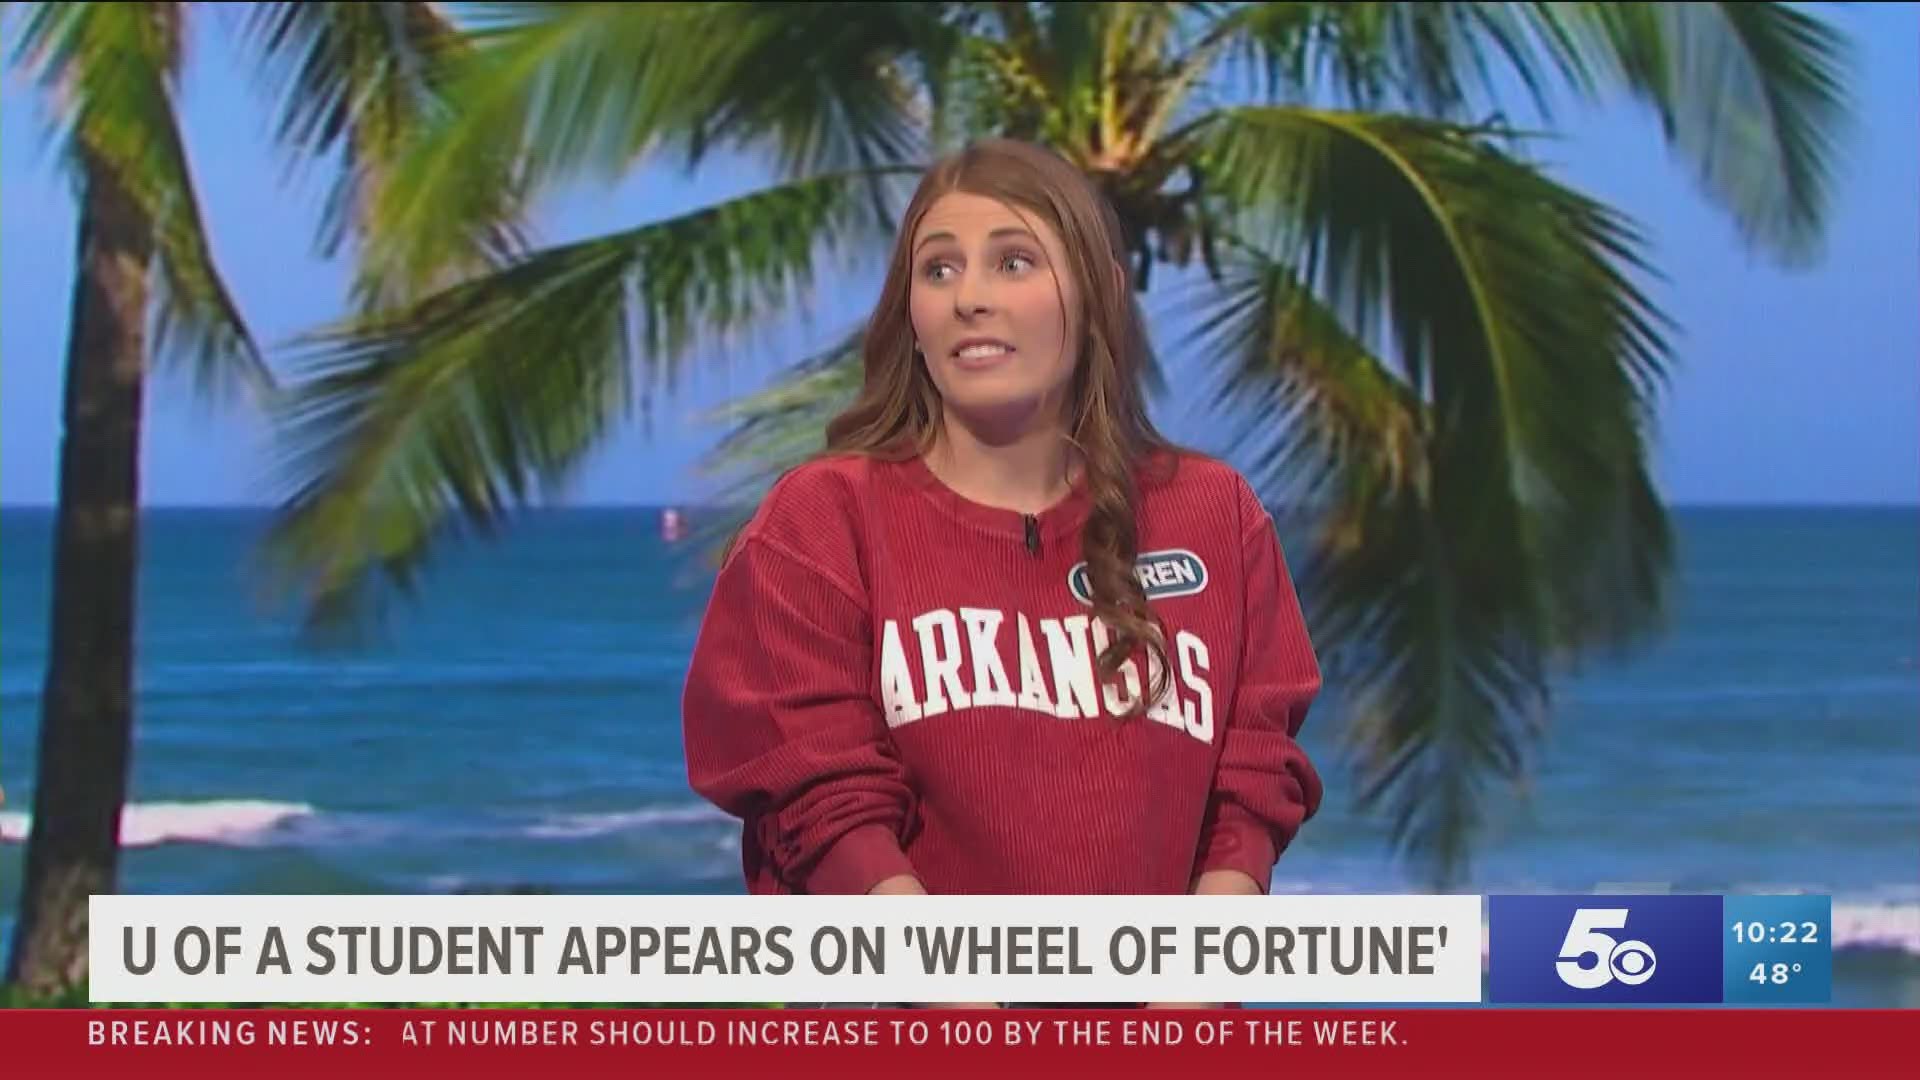 UA student appears on Wheel of Fortune